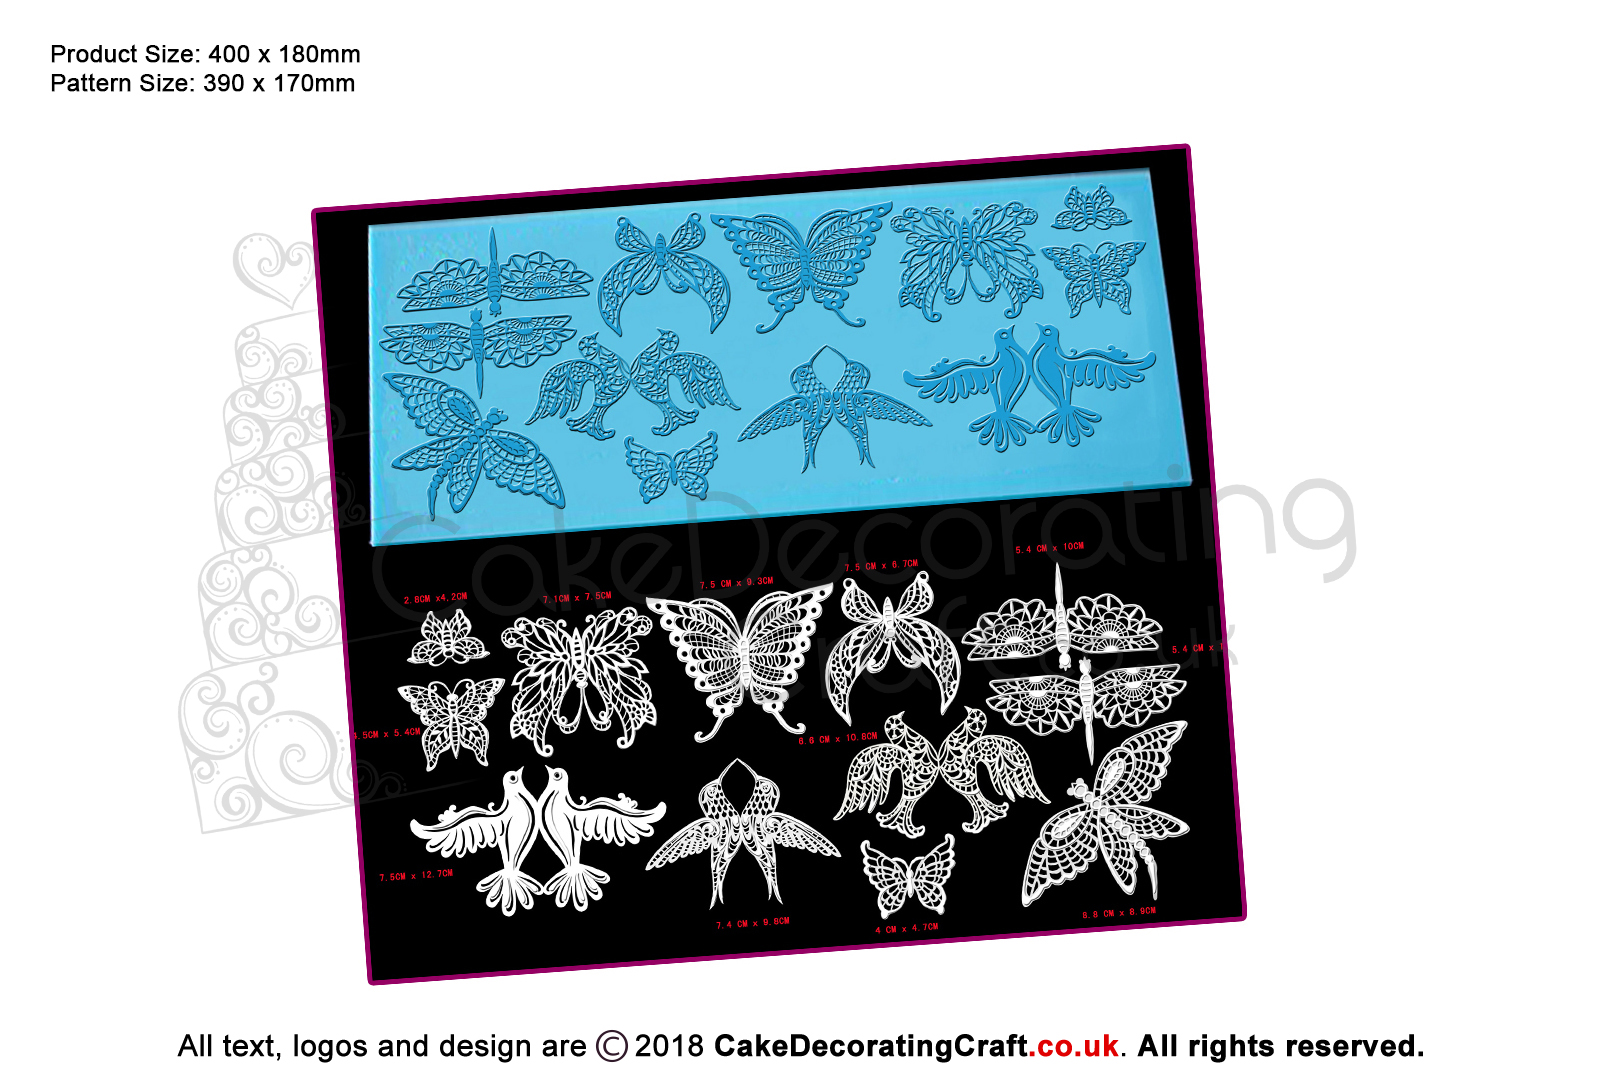 3D Birds and Butterfly | Cake Lace Mats | Cake Decorating Starter Kit | Cake Decorating Craft Tool | Christmas Cake Cupcake Craft Gift Ideas